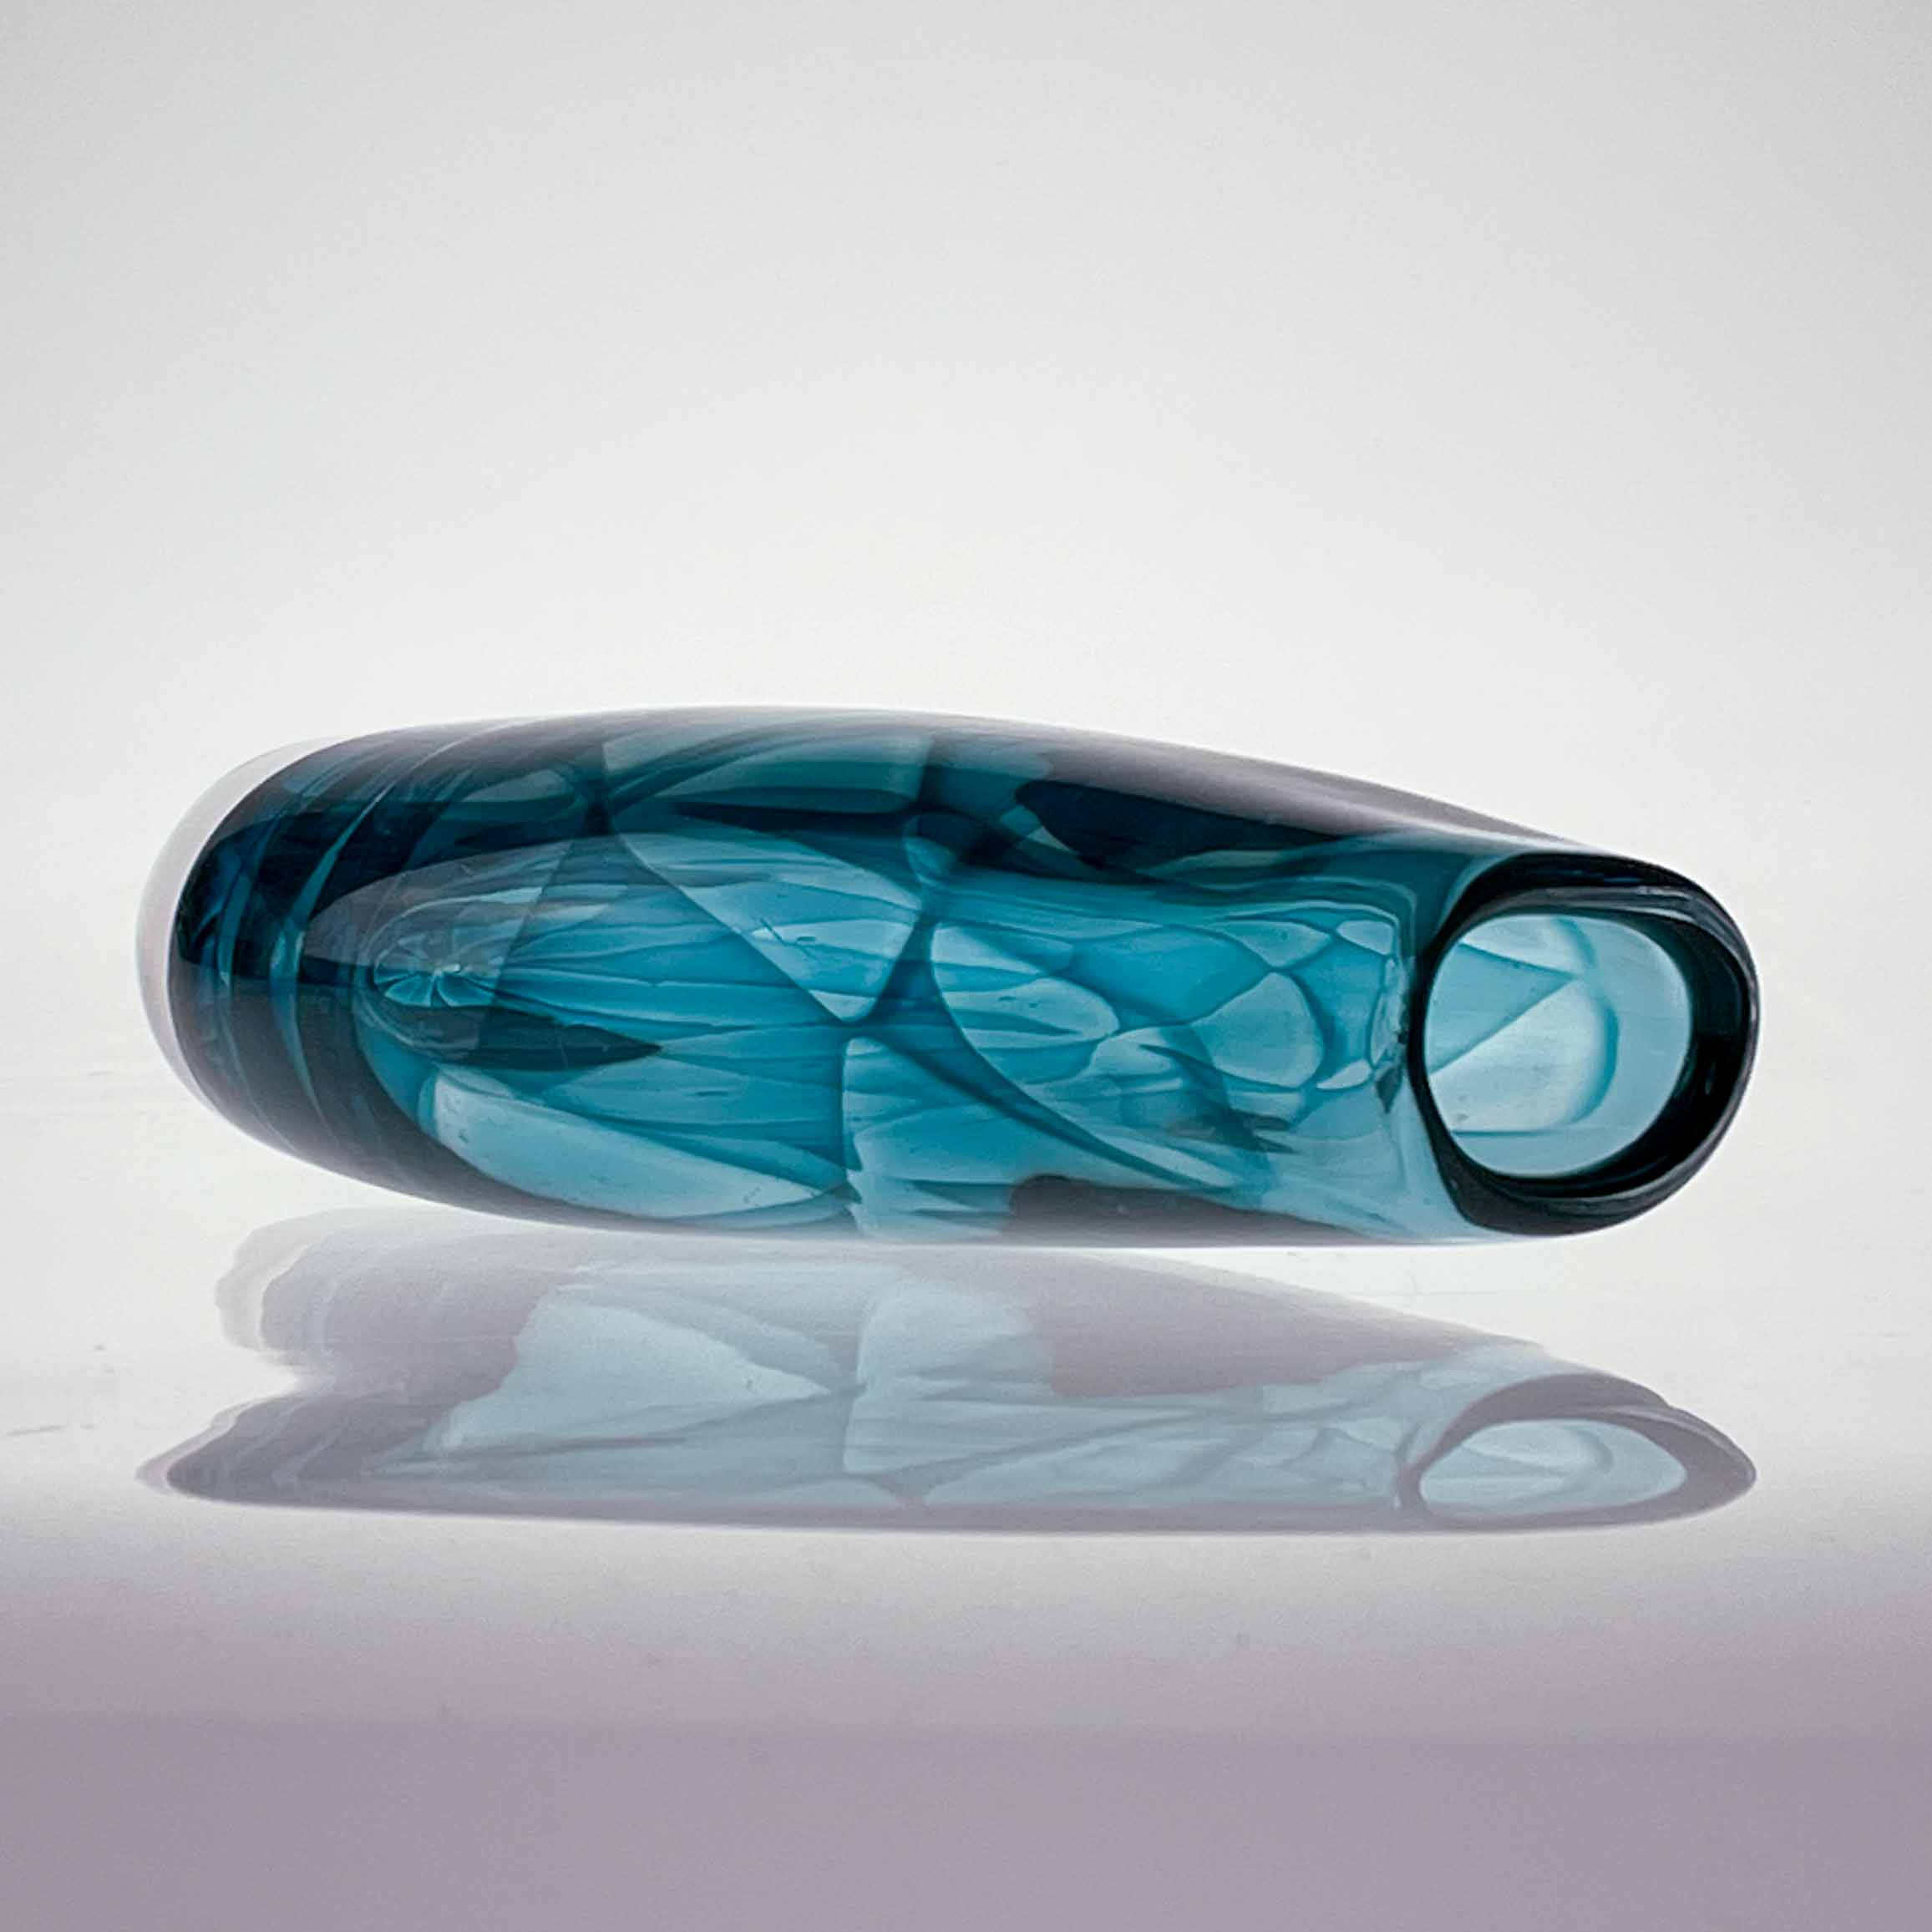 Vicke Lindstrand - Turquoise and clear glass art-object "Colora", model LH 1674 - Kosta Glasbruk, Sweden 1960's